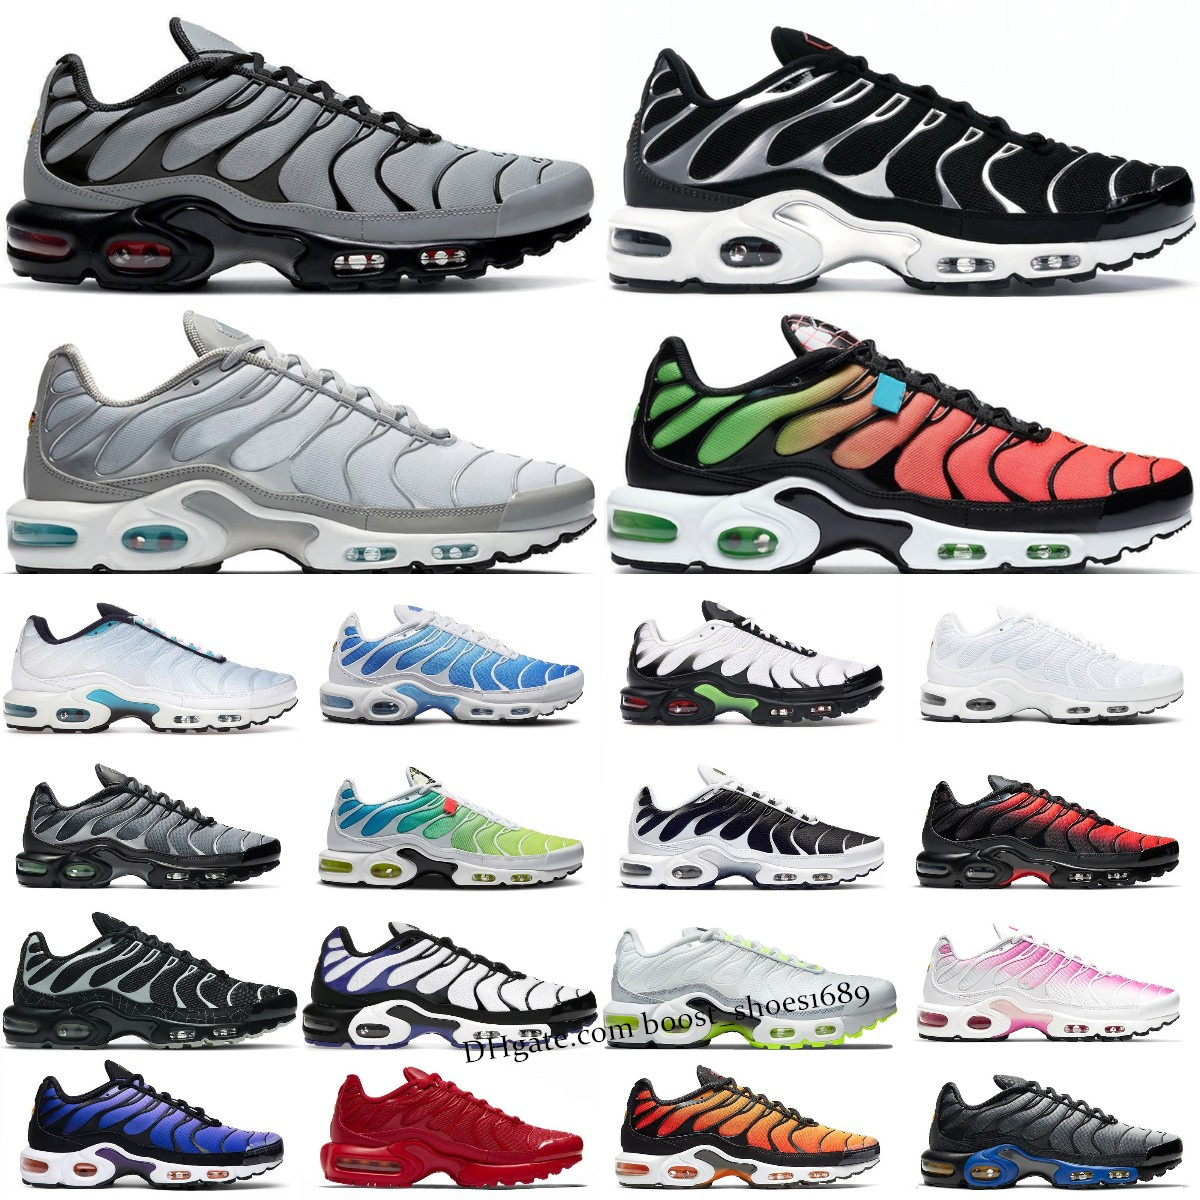 TN Plus Trainers para hombres TNS Running Zapatos Blancos Black Anthracite Blue Red Dusk Atlanta Universidad Gold Bullet Women Breathable Sports Sports 36-46